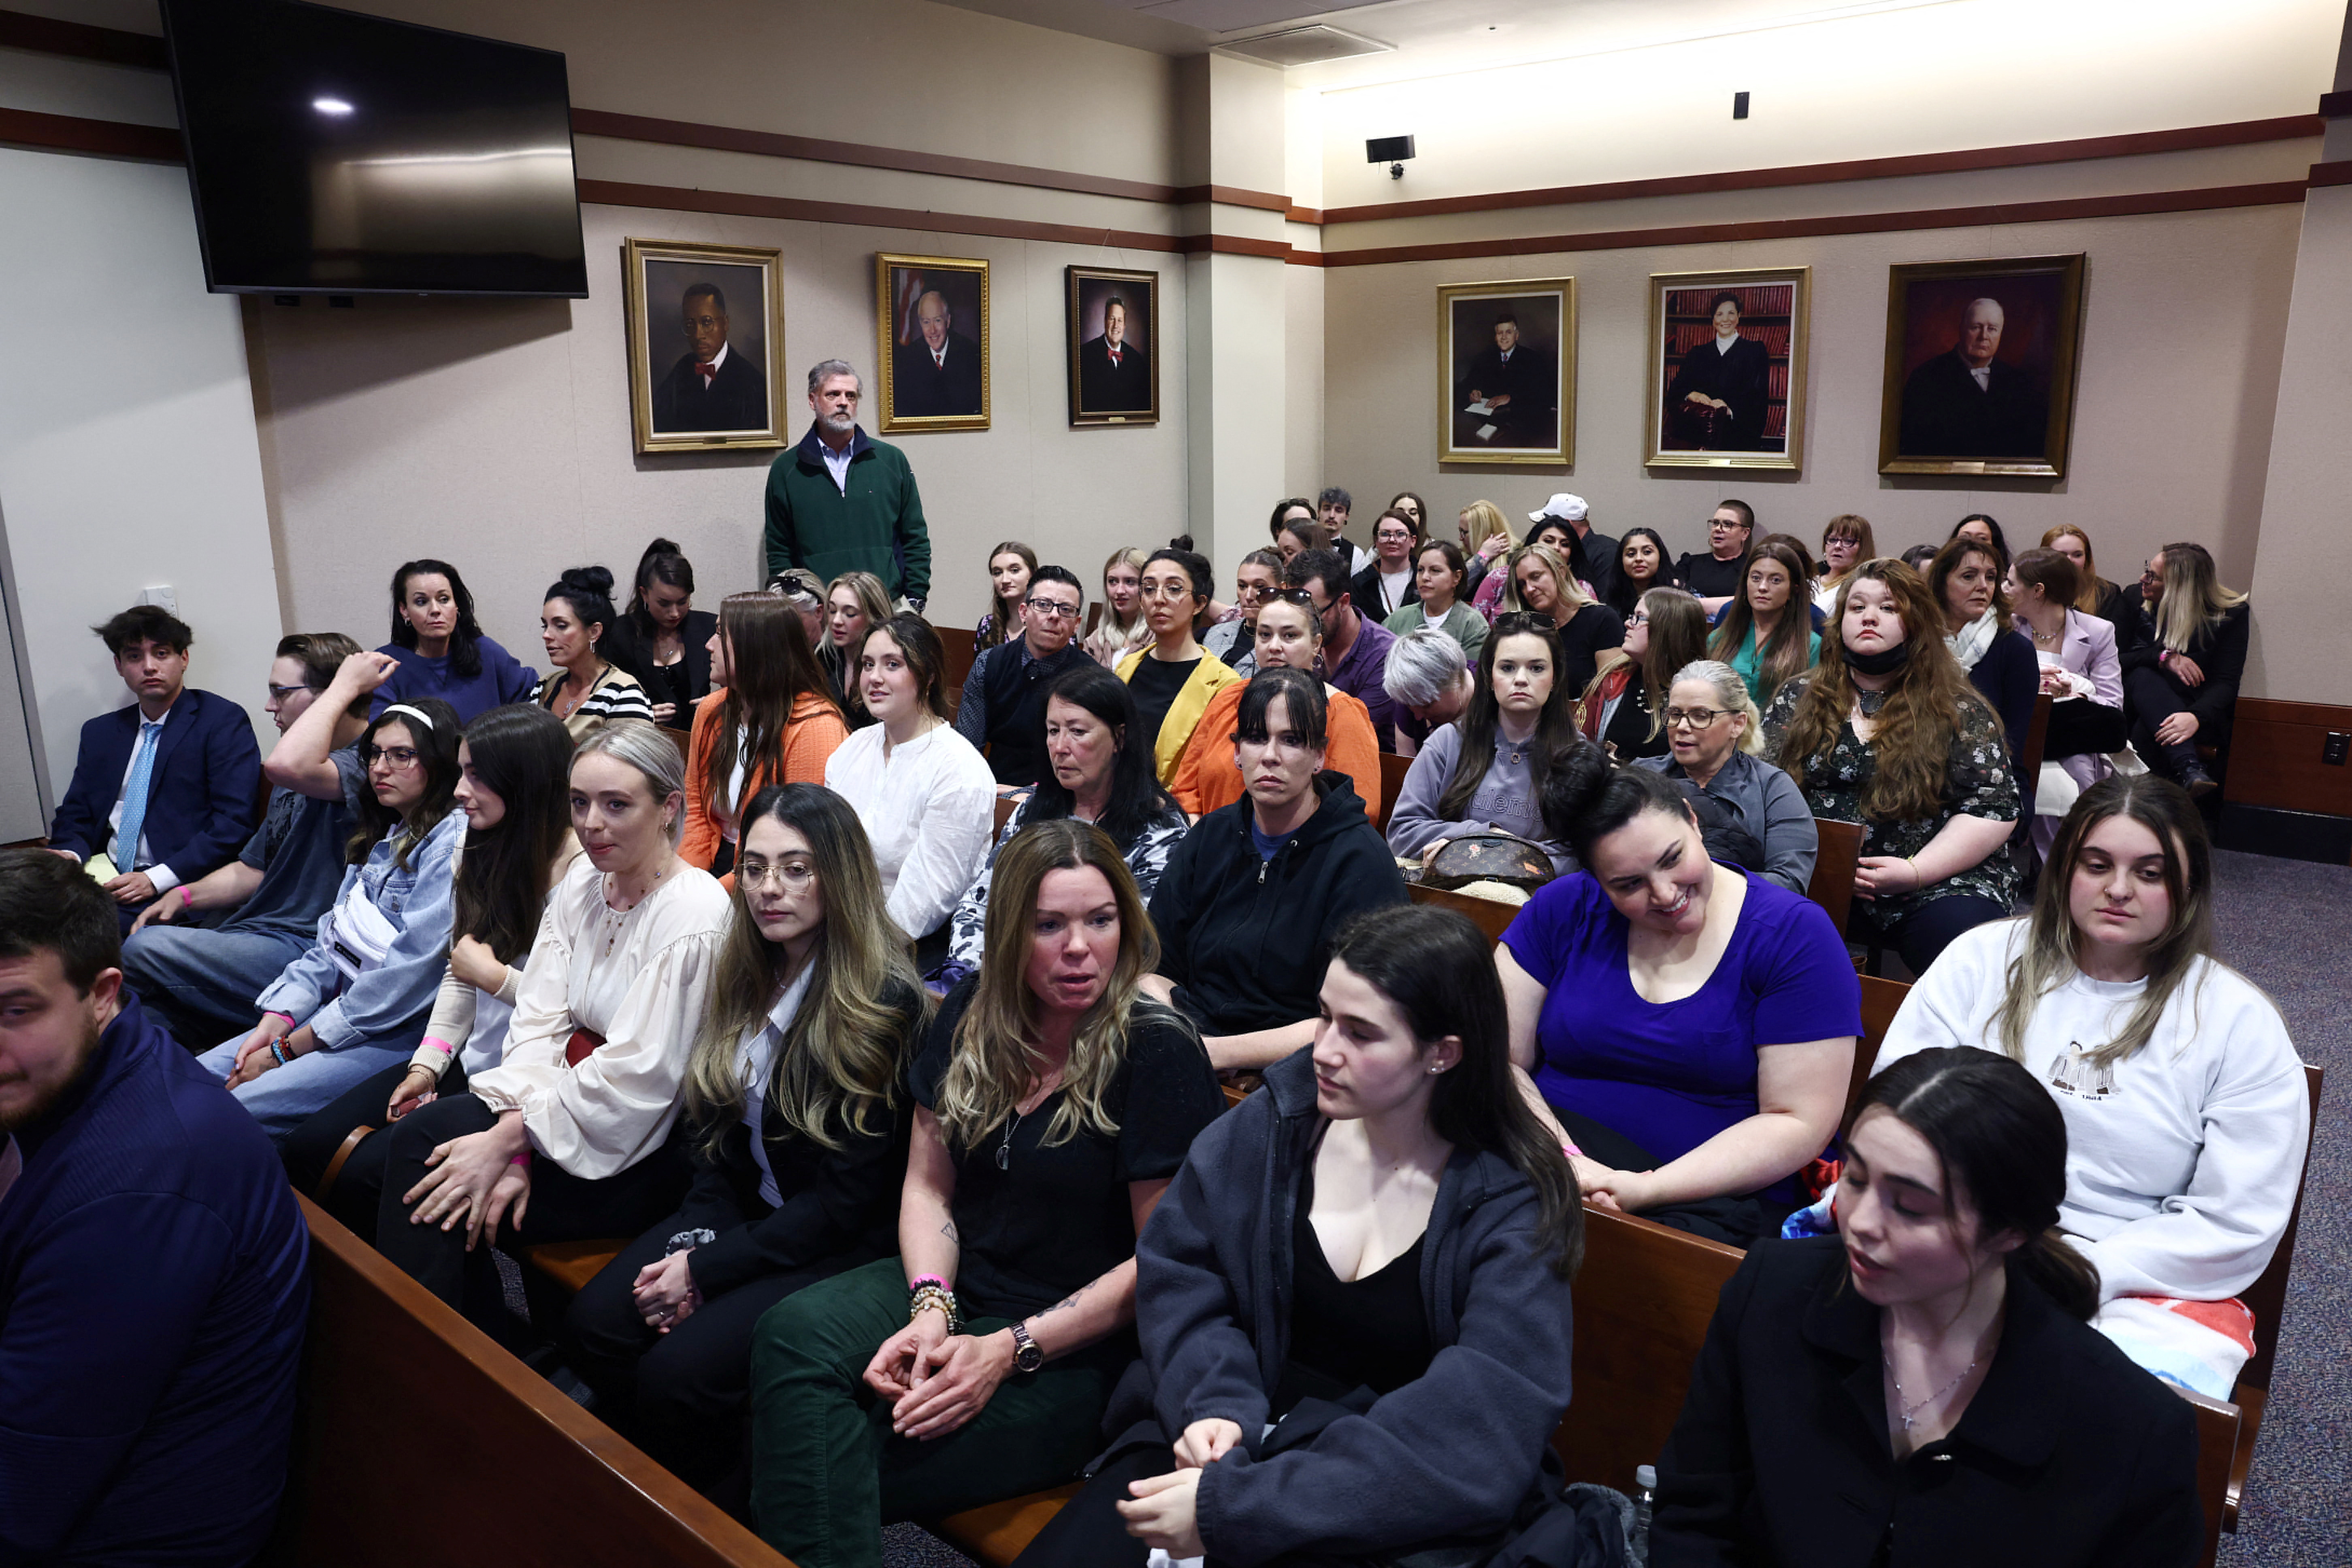 Spectators fill the courtroom (Jim Lo Scalzo/REUTERS)